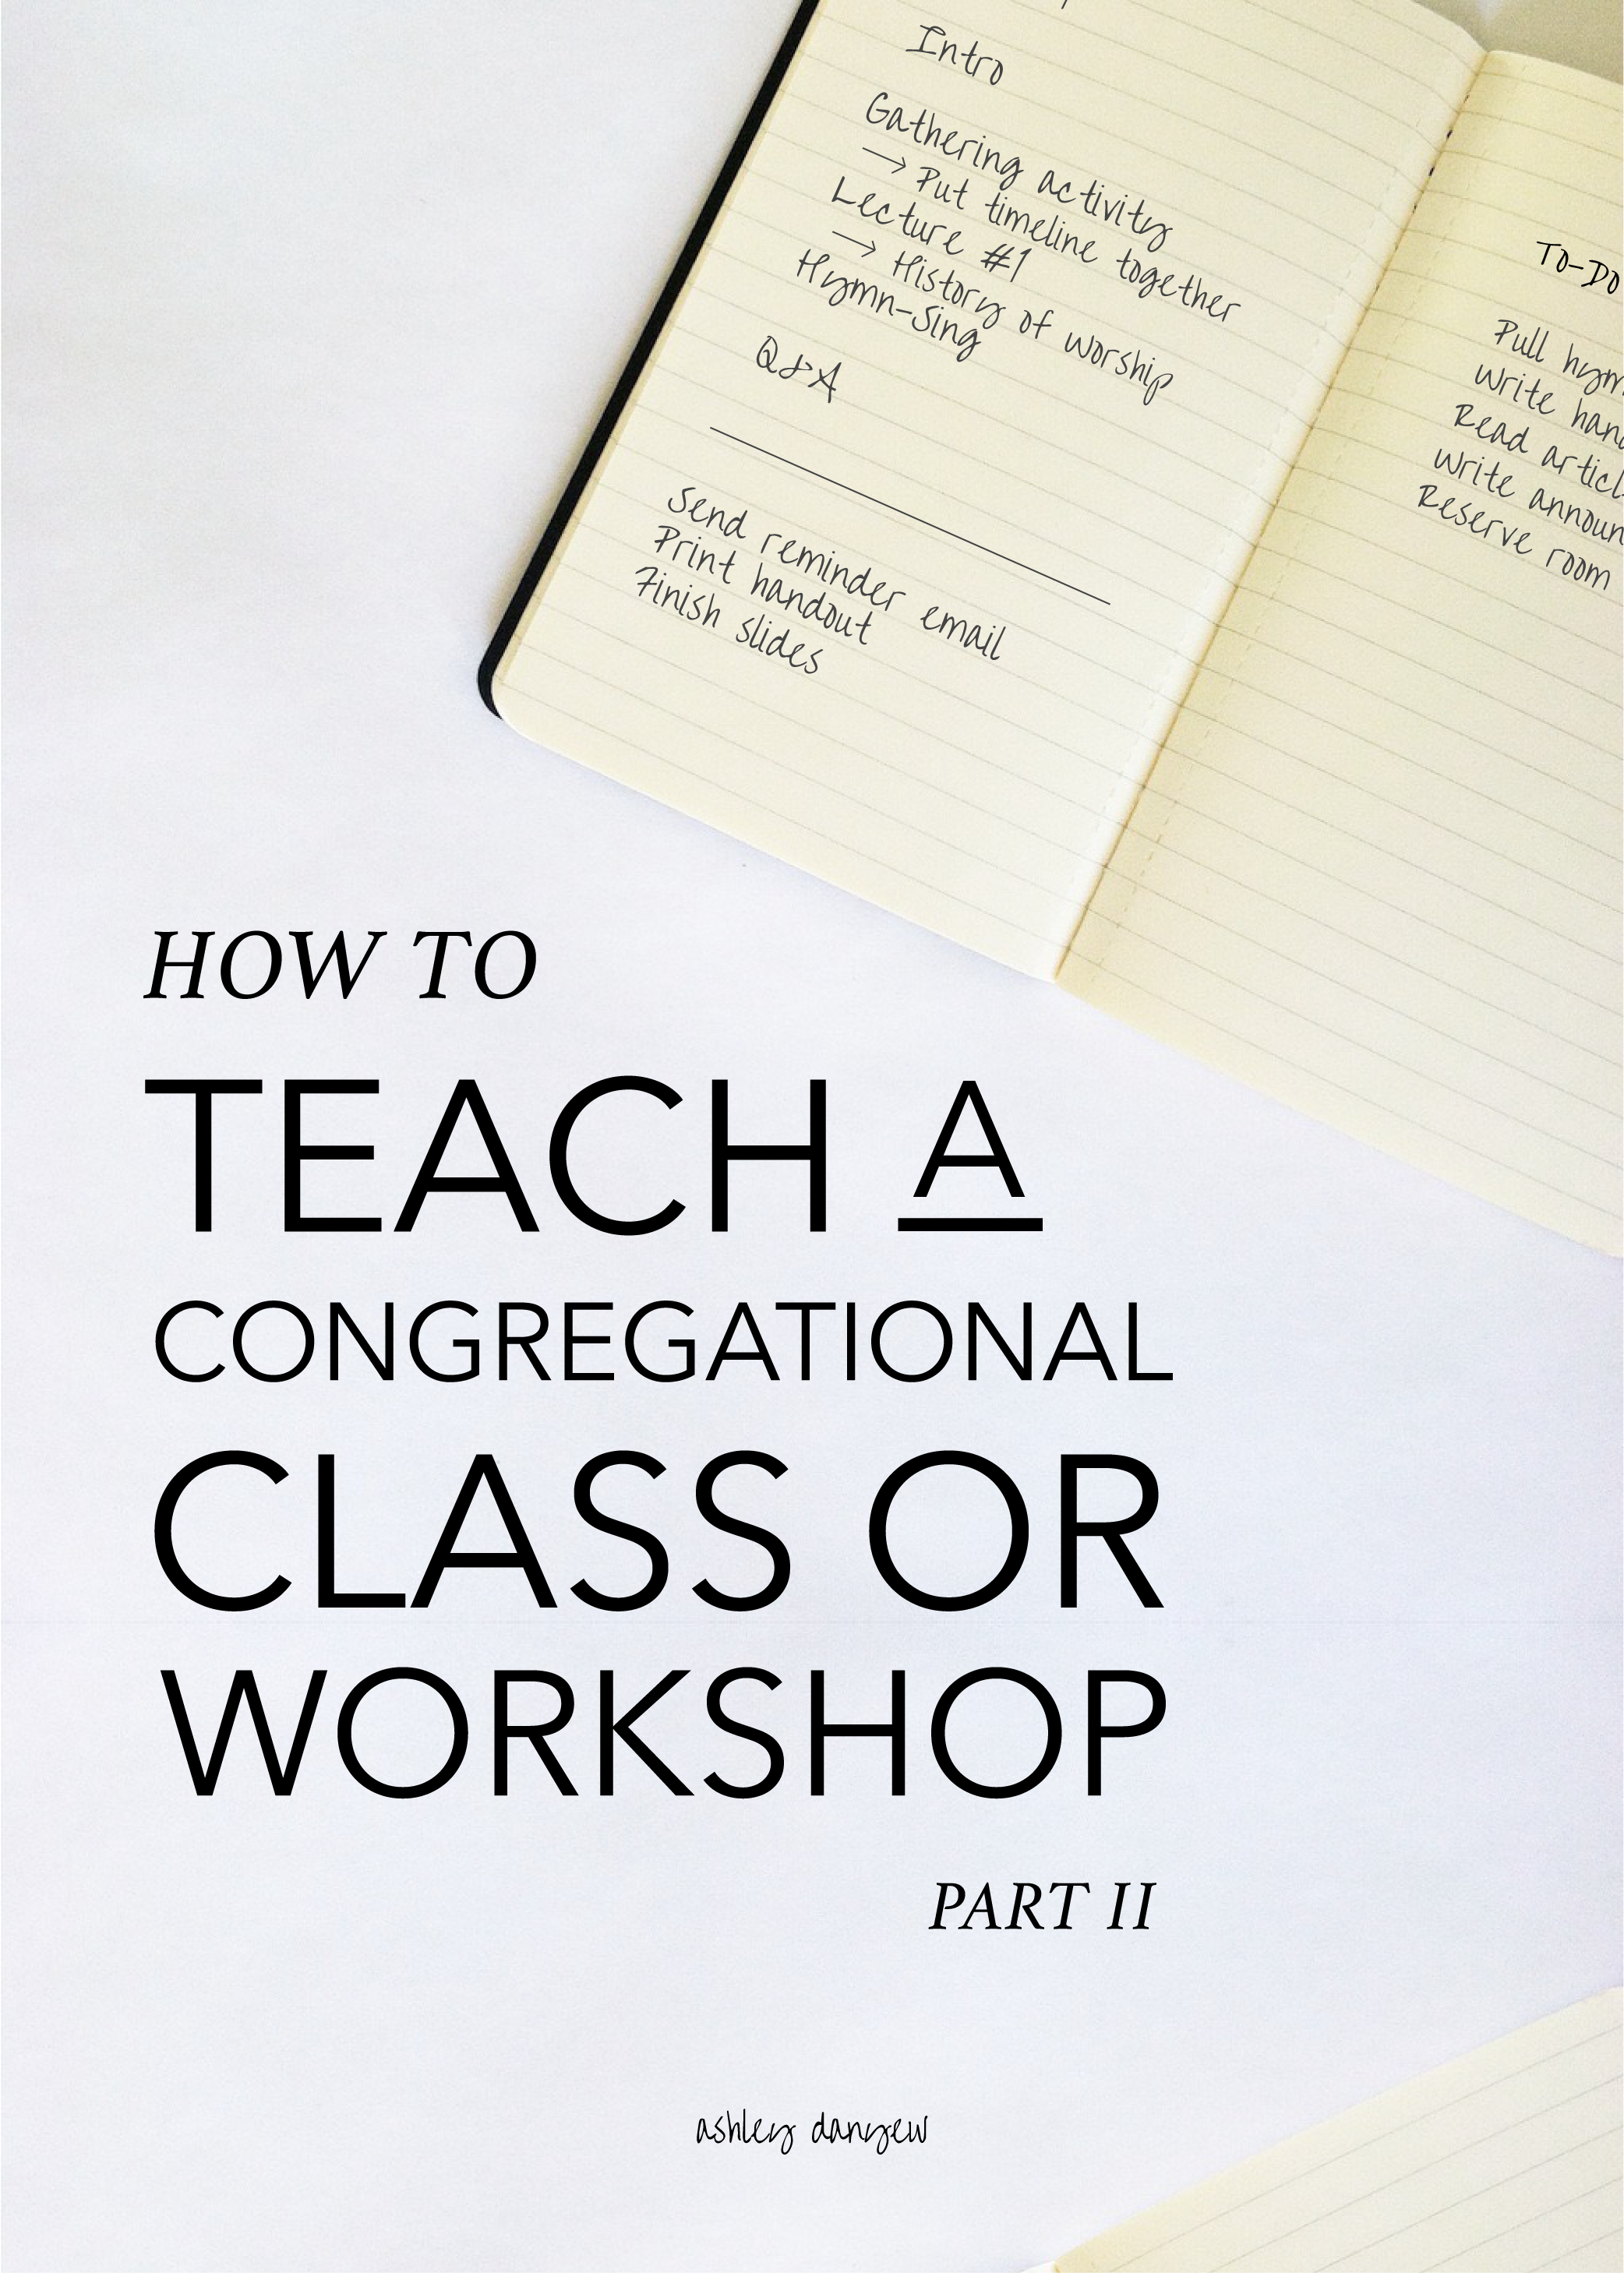 Copy of How to Teach a Congregational Class or Workshop - Part II